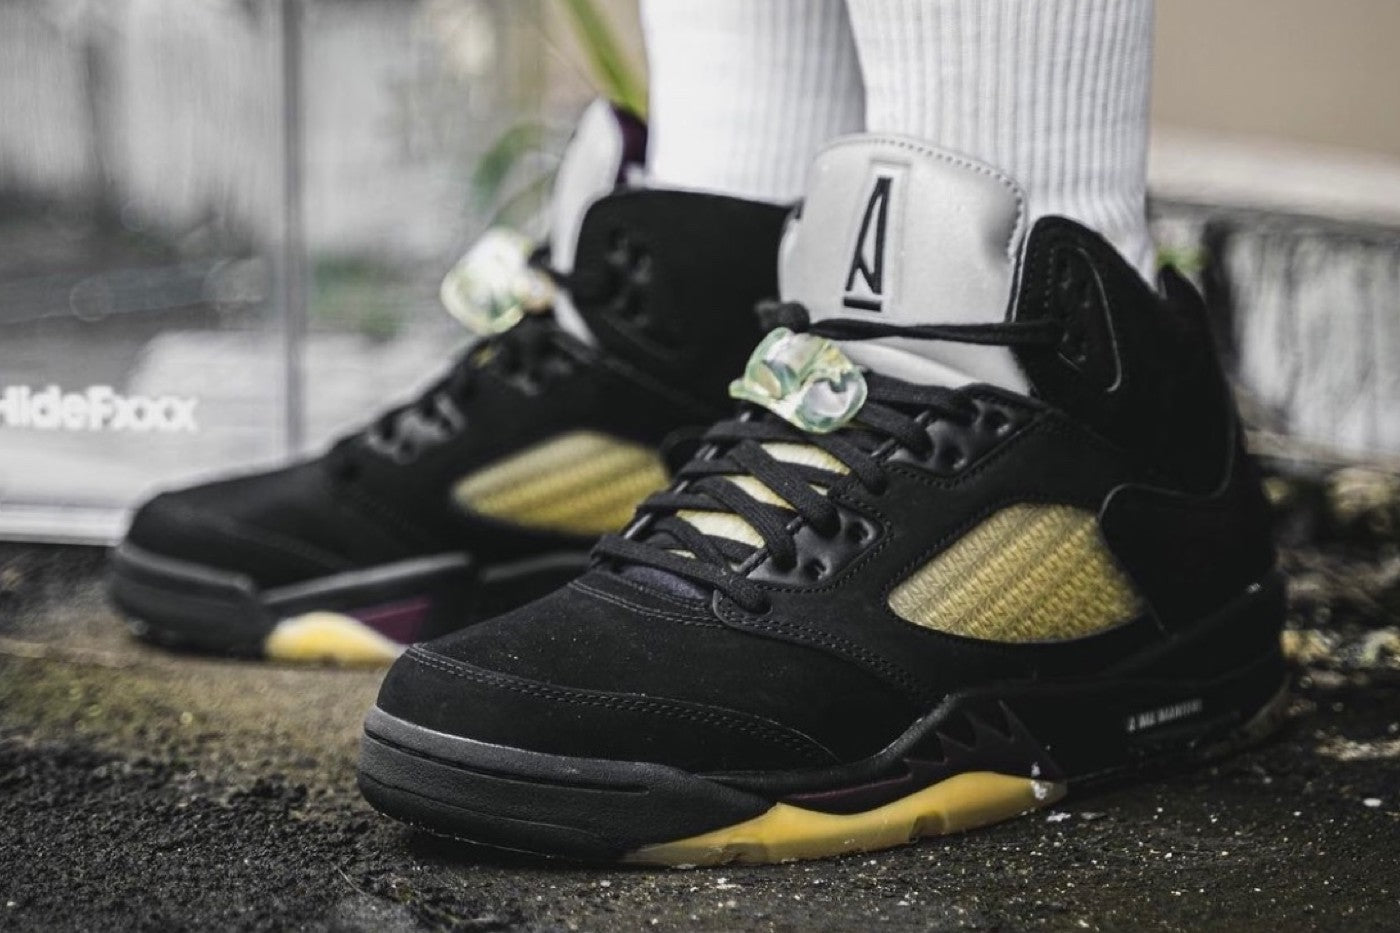 An On-Foot Look at the A Ma Maniére x Air Jordan 5 "Black"